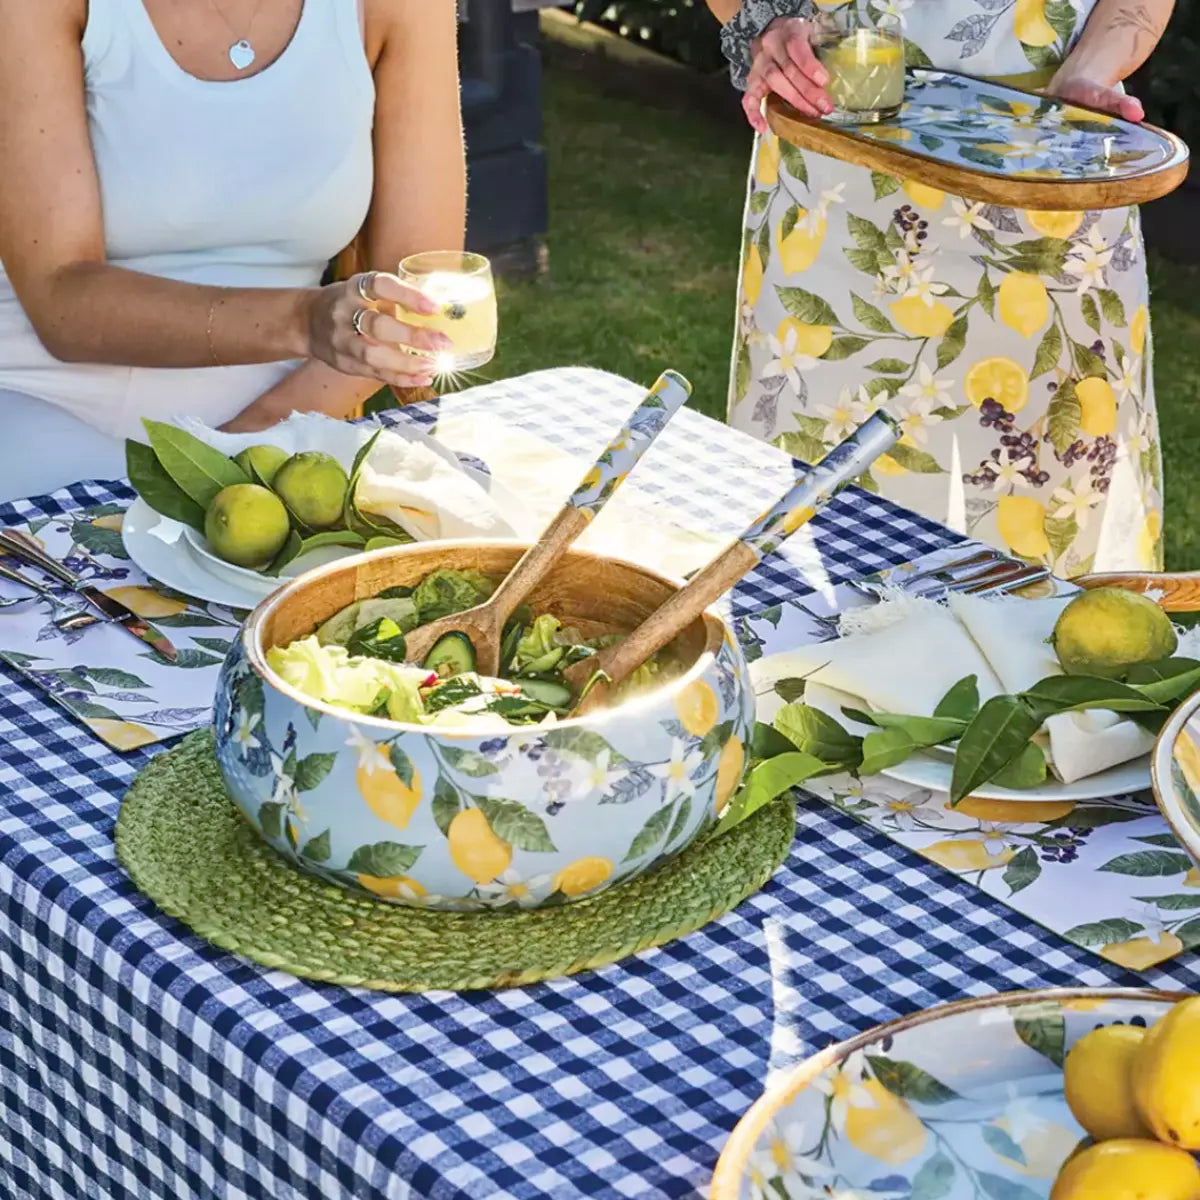 Two women are sitting at a table with j.elliot's Lemon Round Serving Tray and lemons.